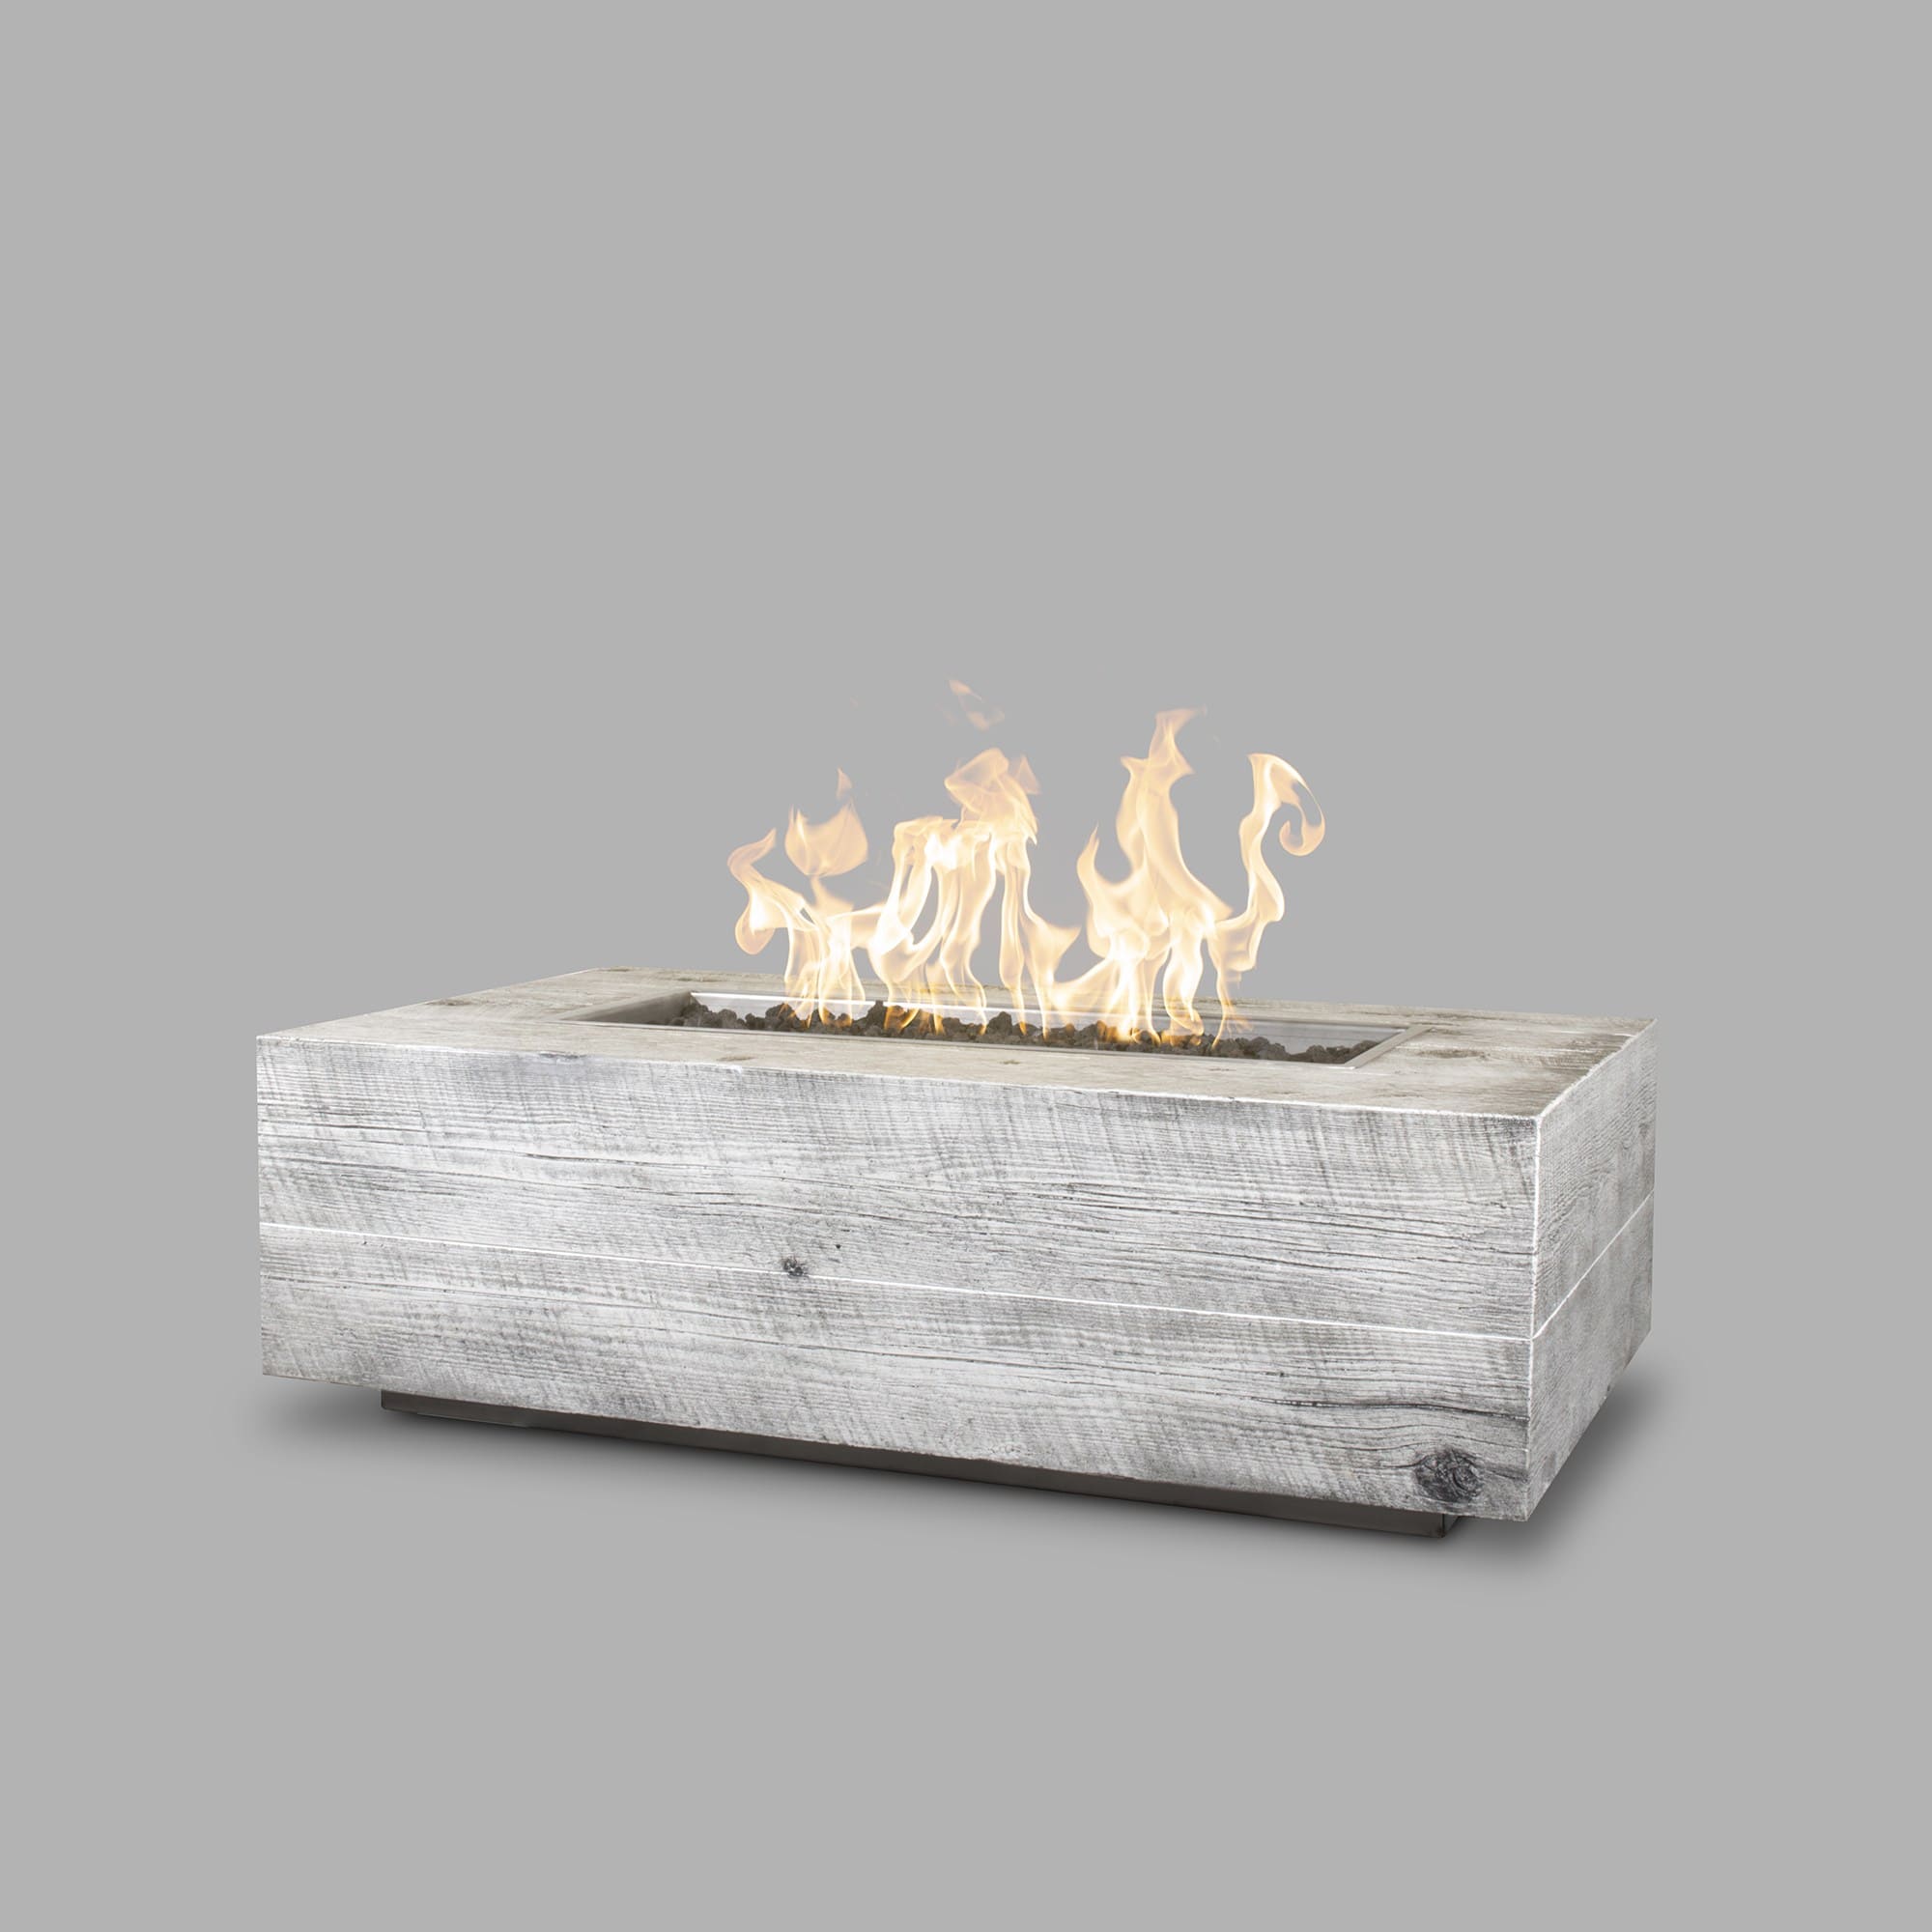 The Outdoor Plus Coronado Wood Grain Fire Pit in Ivorywith flame on white background